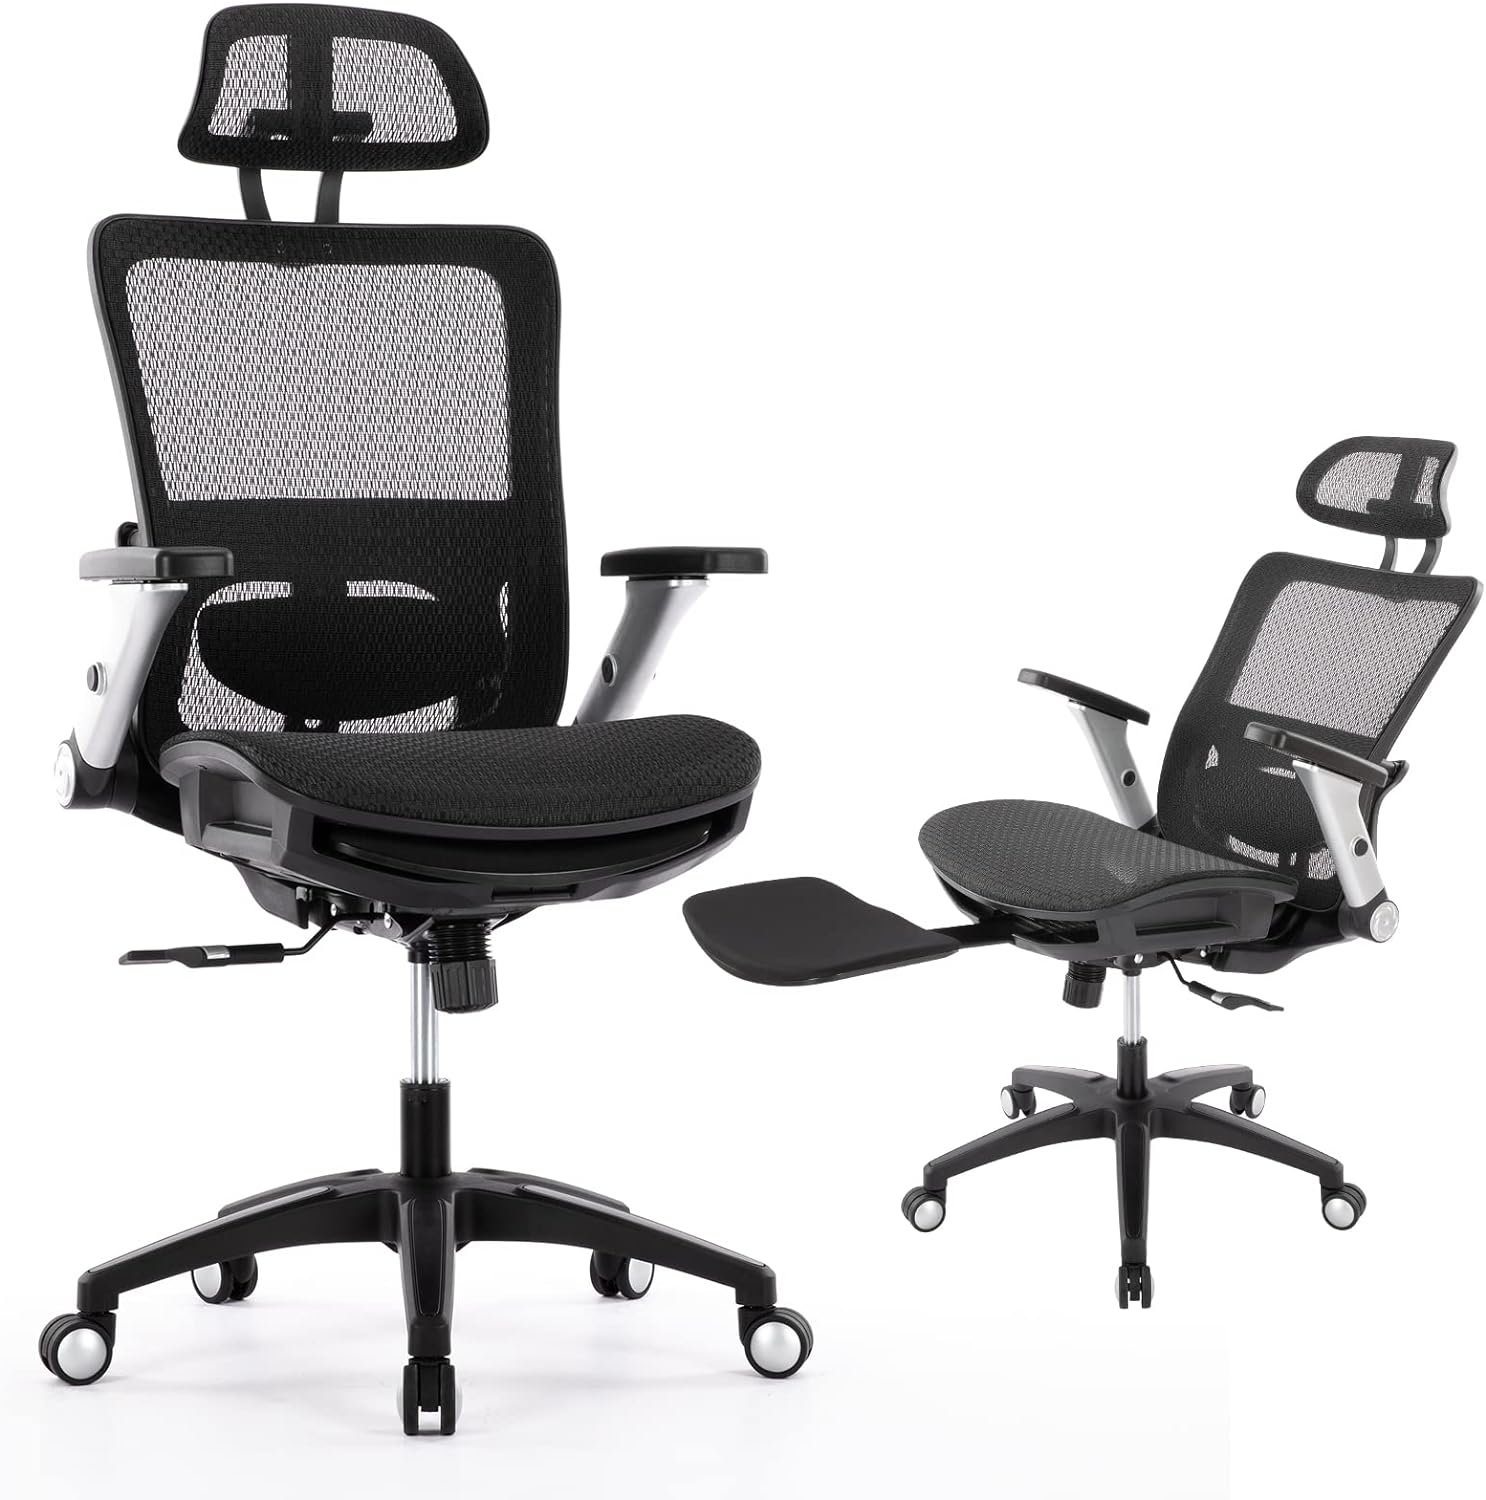 Ergonomic Mesh Office Chair with Footrest, High Back Computer Executive Desk Chair with Headrest and 4D Flip-up Armrests, Adjustable Tilt Lock and Lumbar Support-Black